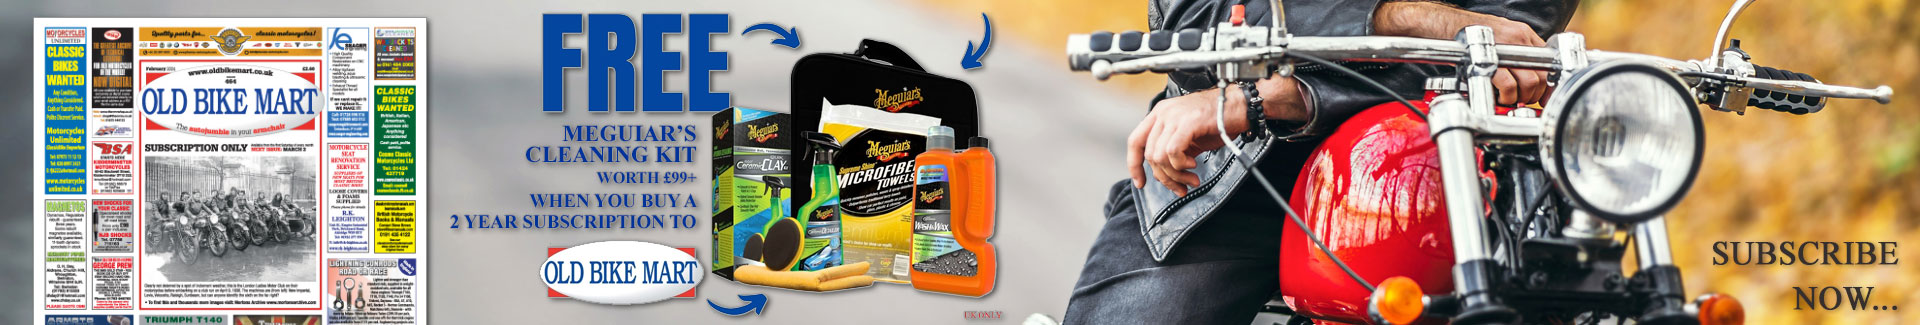 Old Bike Mart Subscription with Meguiars Cleaning Kit for £48 for 2 Years